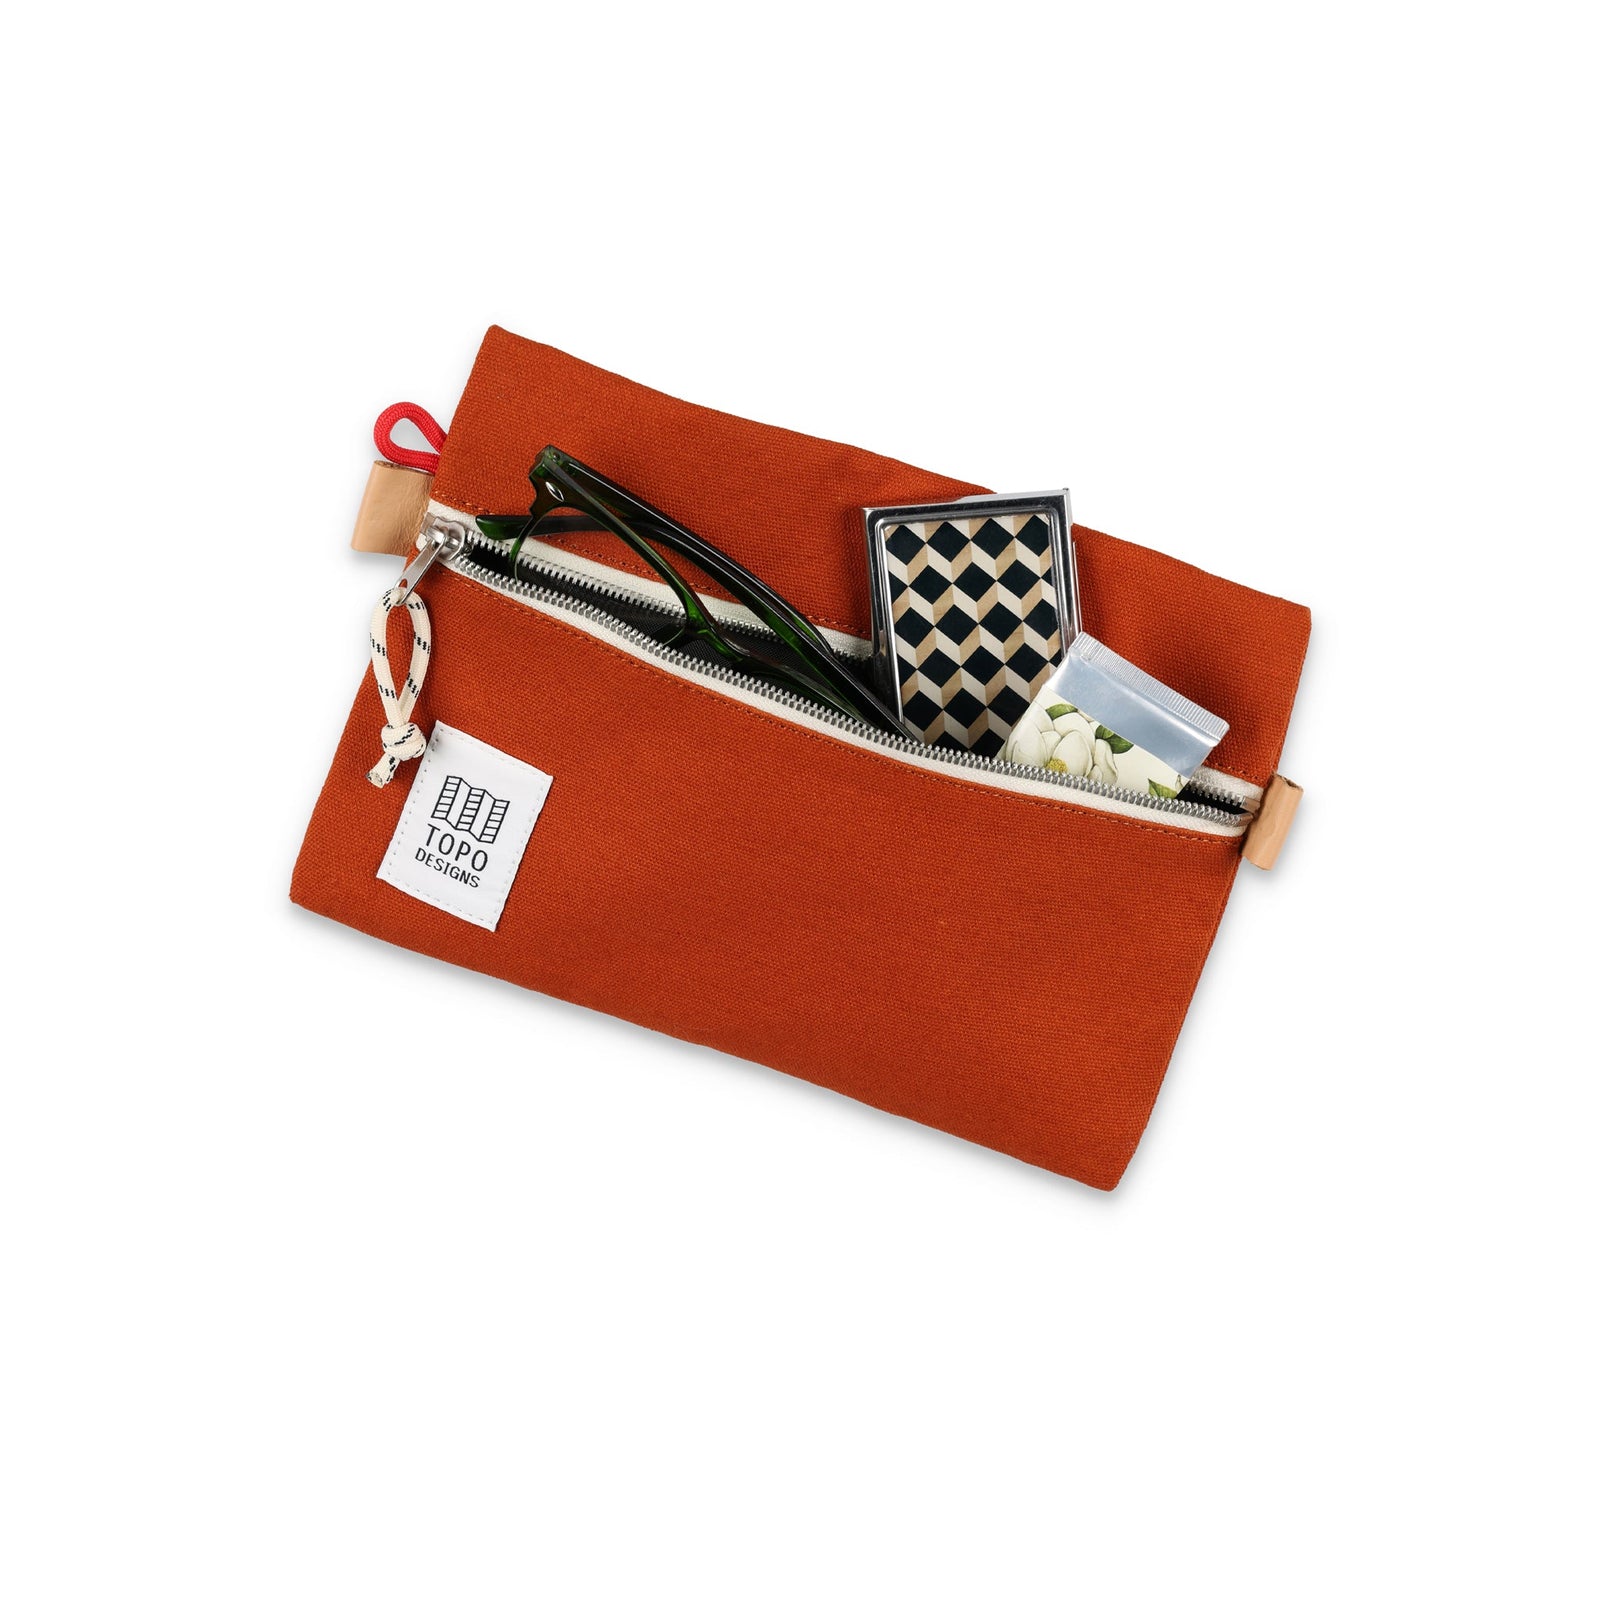 Topo Designs Accessory Bag "Medium" in "Clay" orange canvas to with sunglasses and other items to show size.